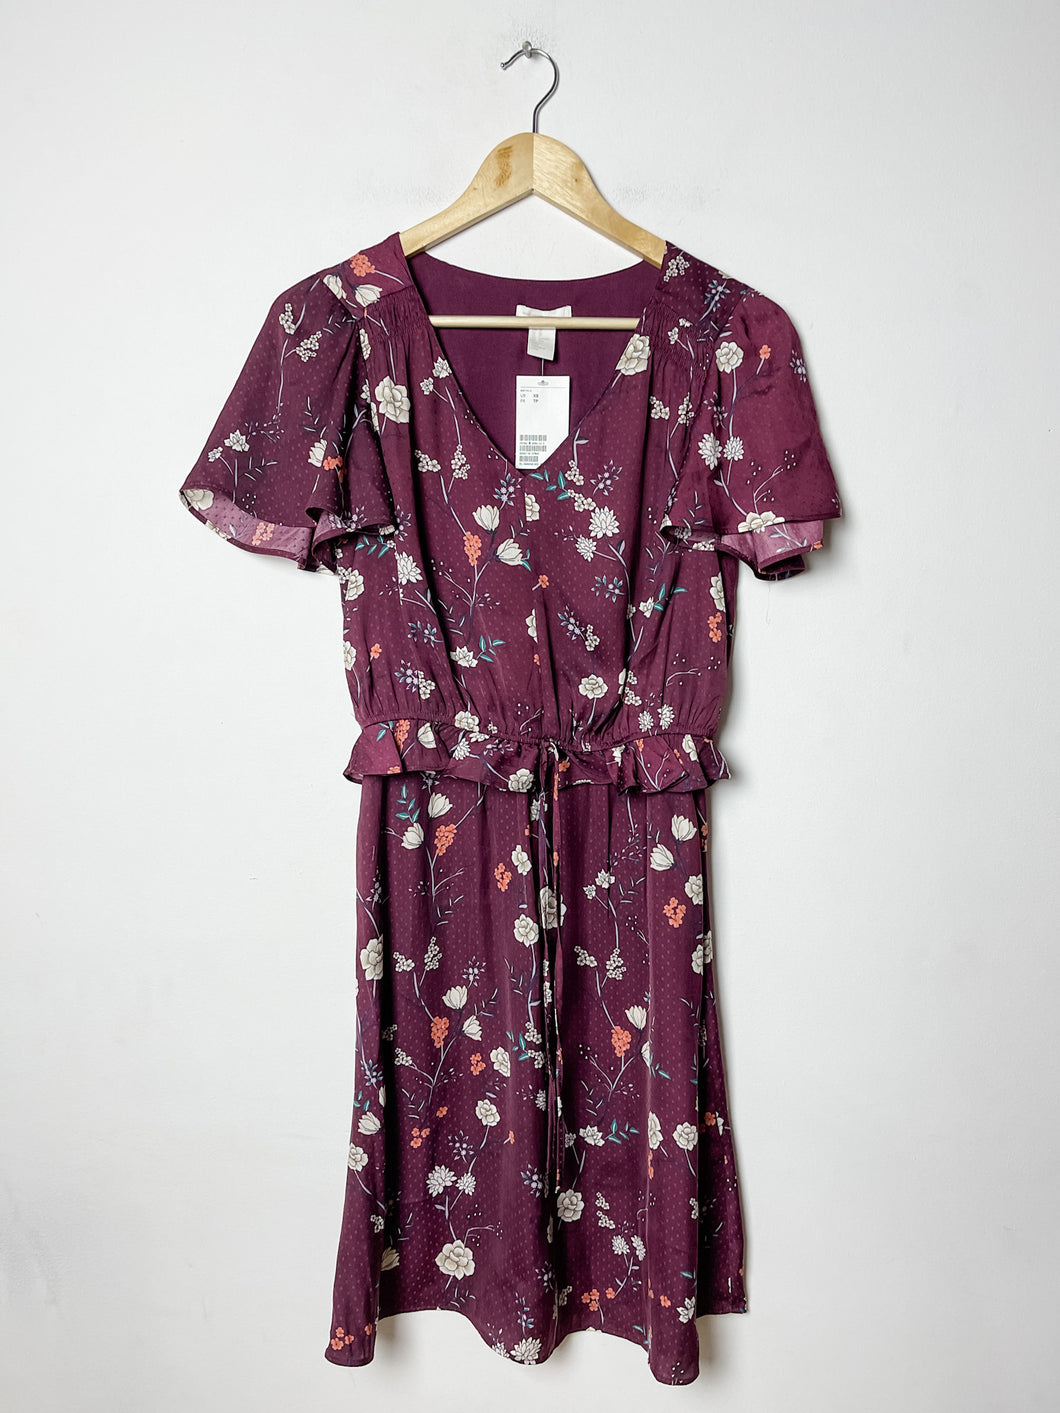 Nursing Floral H&M Dress Size Extra Small